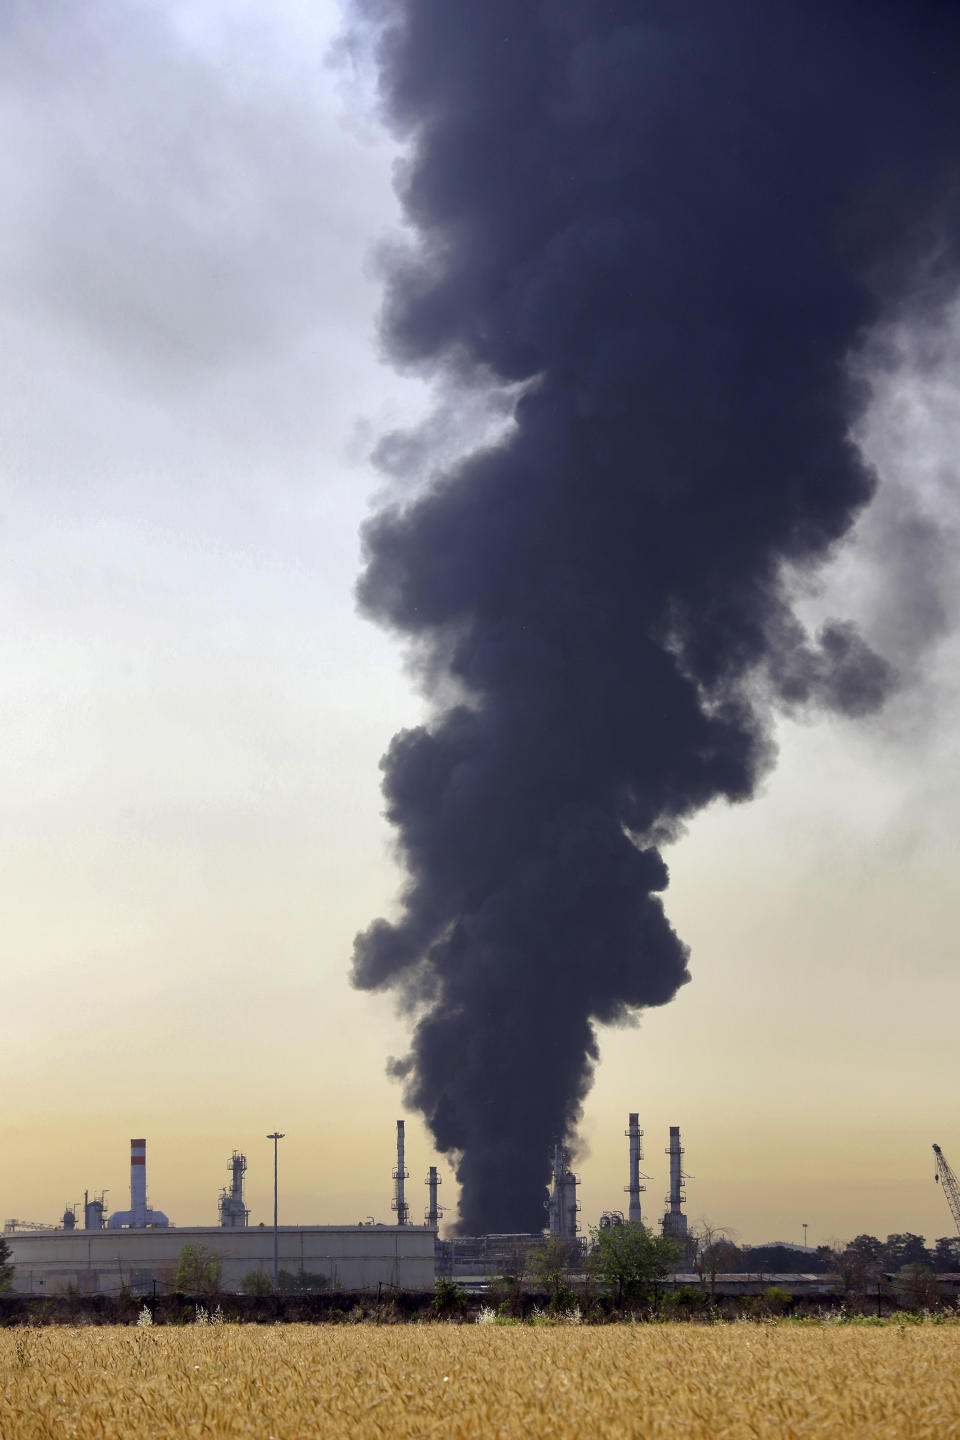 Huge plumes of smoke rise up from Tehran's main oil refinery south of Tehran, Iran, Thursday, June 3, 2021. A massive fire broke out Wednesday night at the oil refinery serving Iran's capital, sending thick plumes of black smoke over Tehran. (AP Photo/Ebrahim Noroozi)